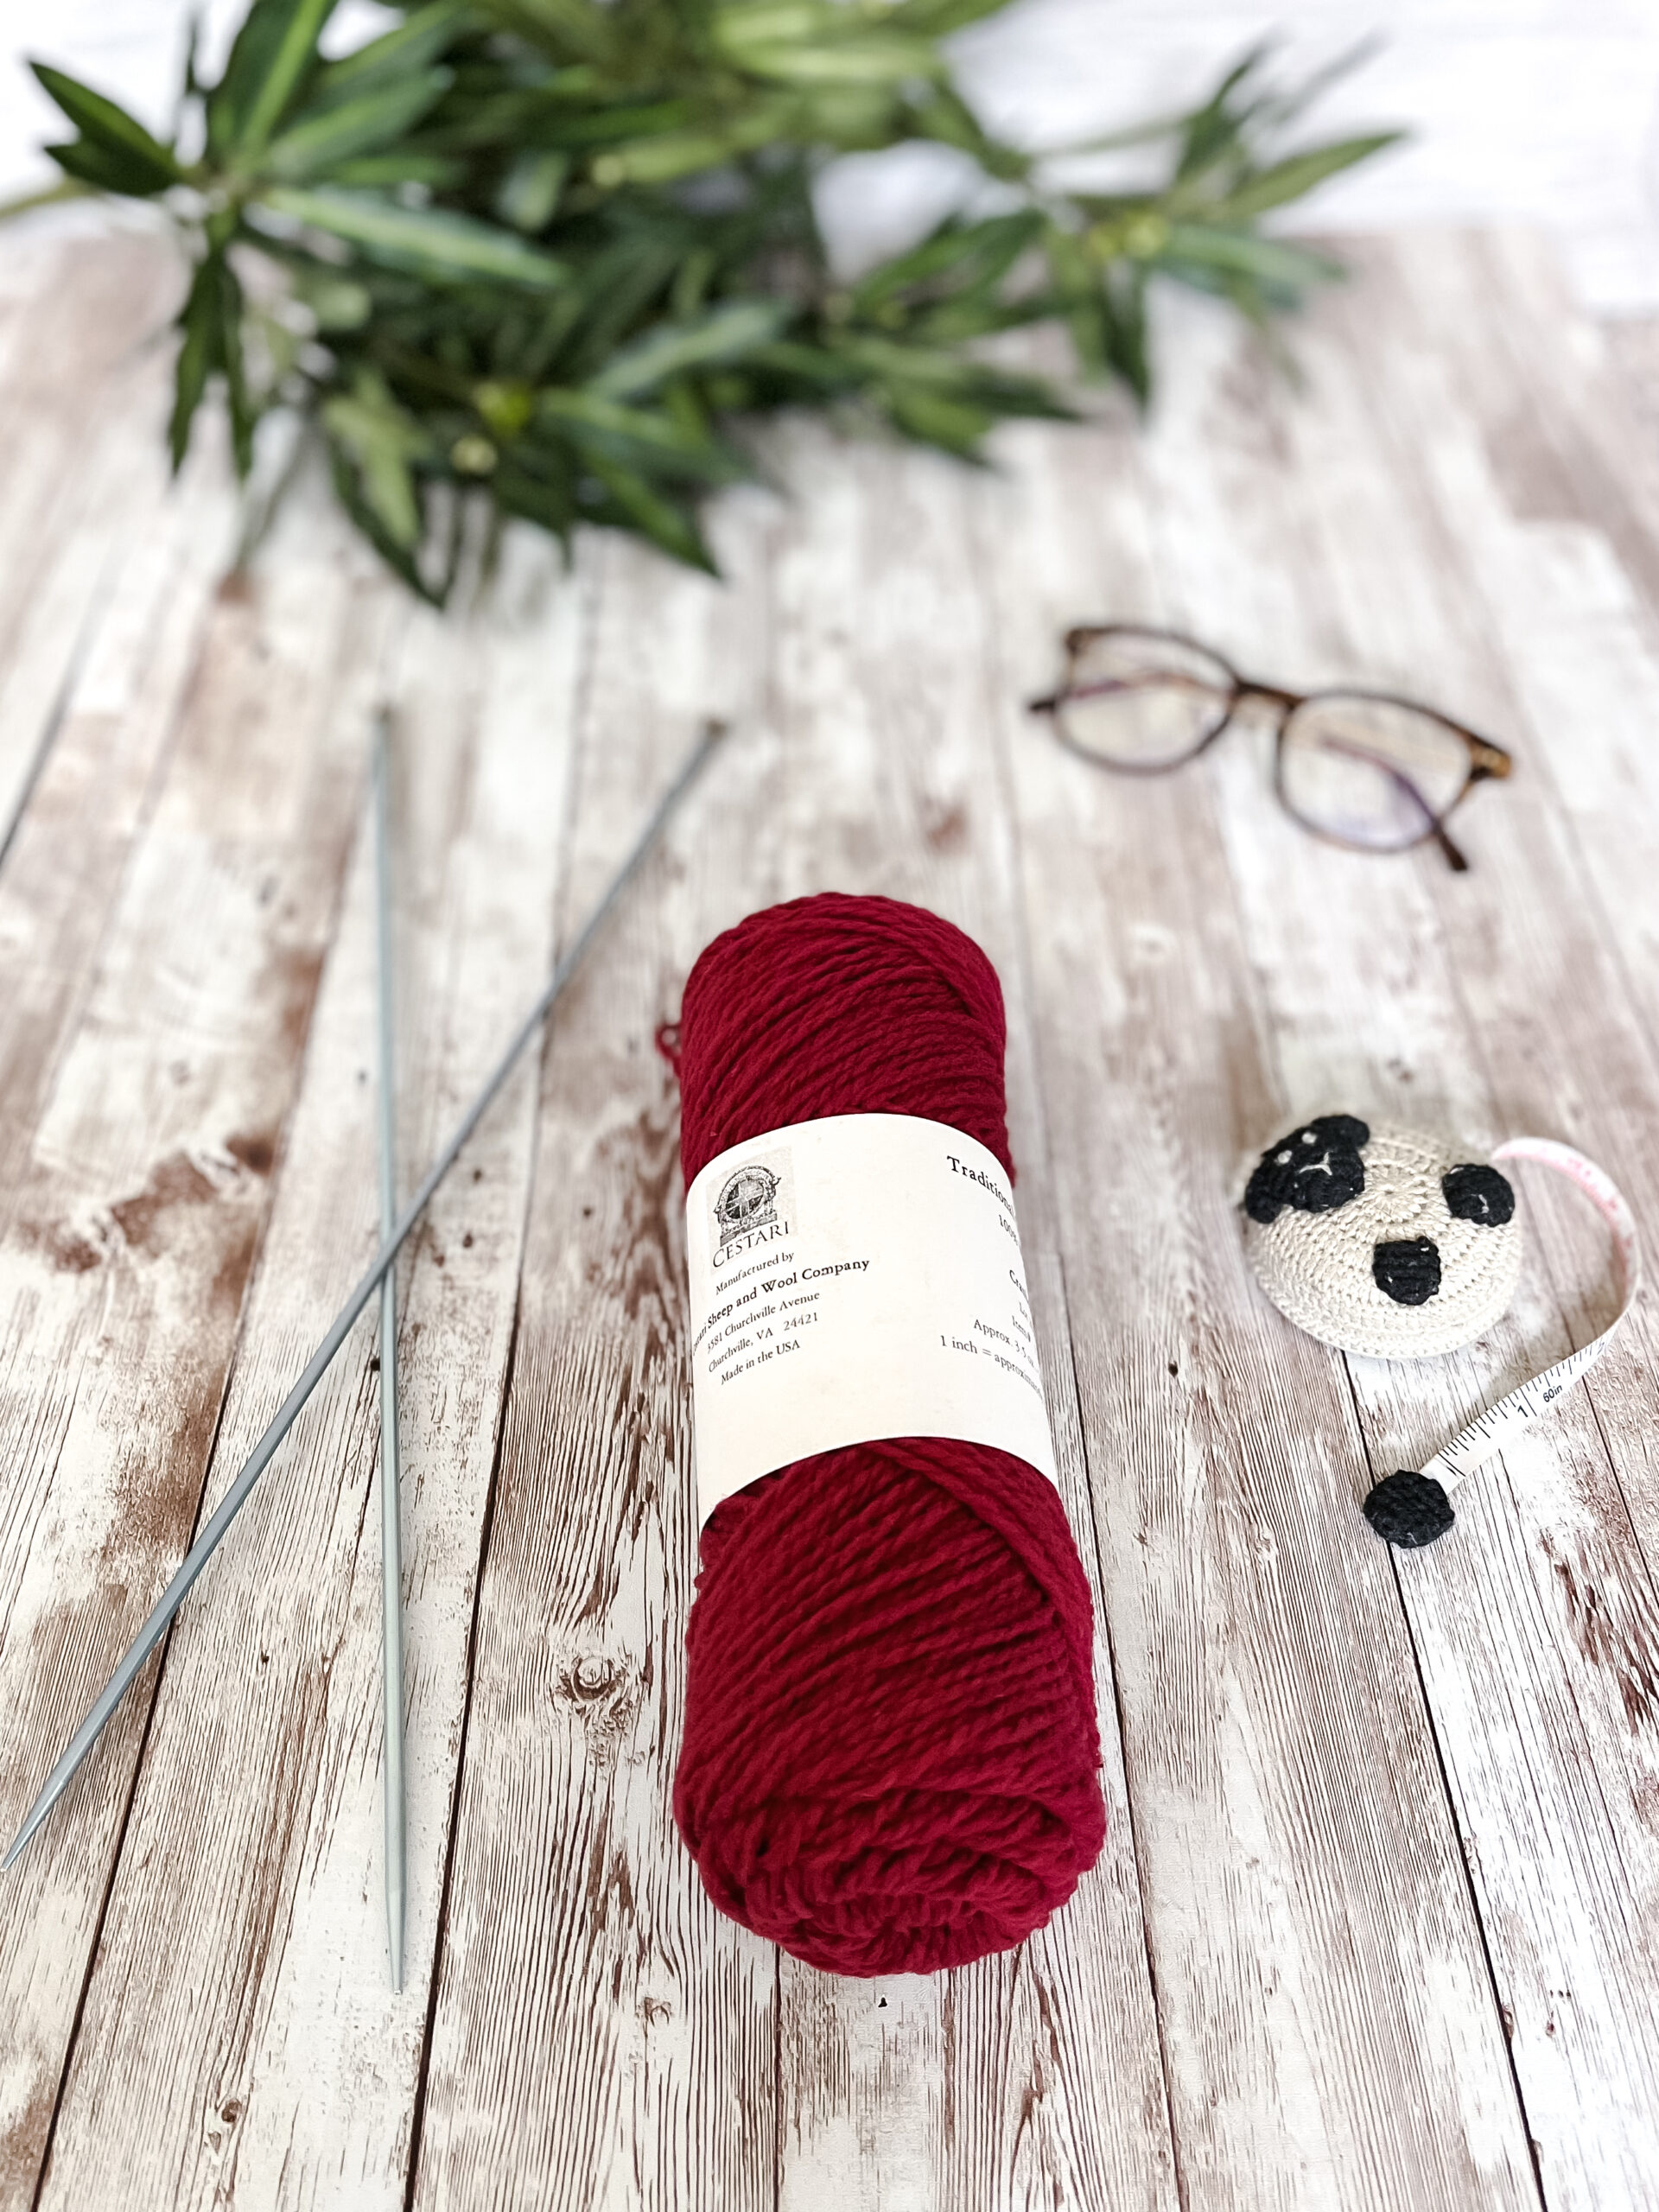 A red skein of yarn rests on a wood plank, with a pair of knitting needles, reading glasses, a lamb tape measure and greenery around it